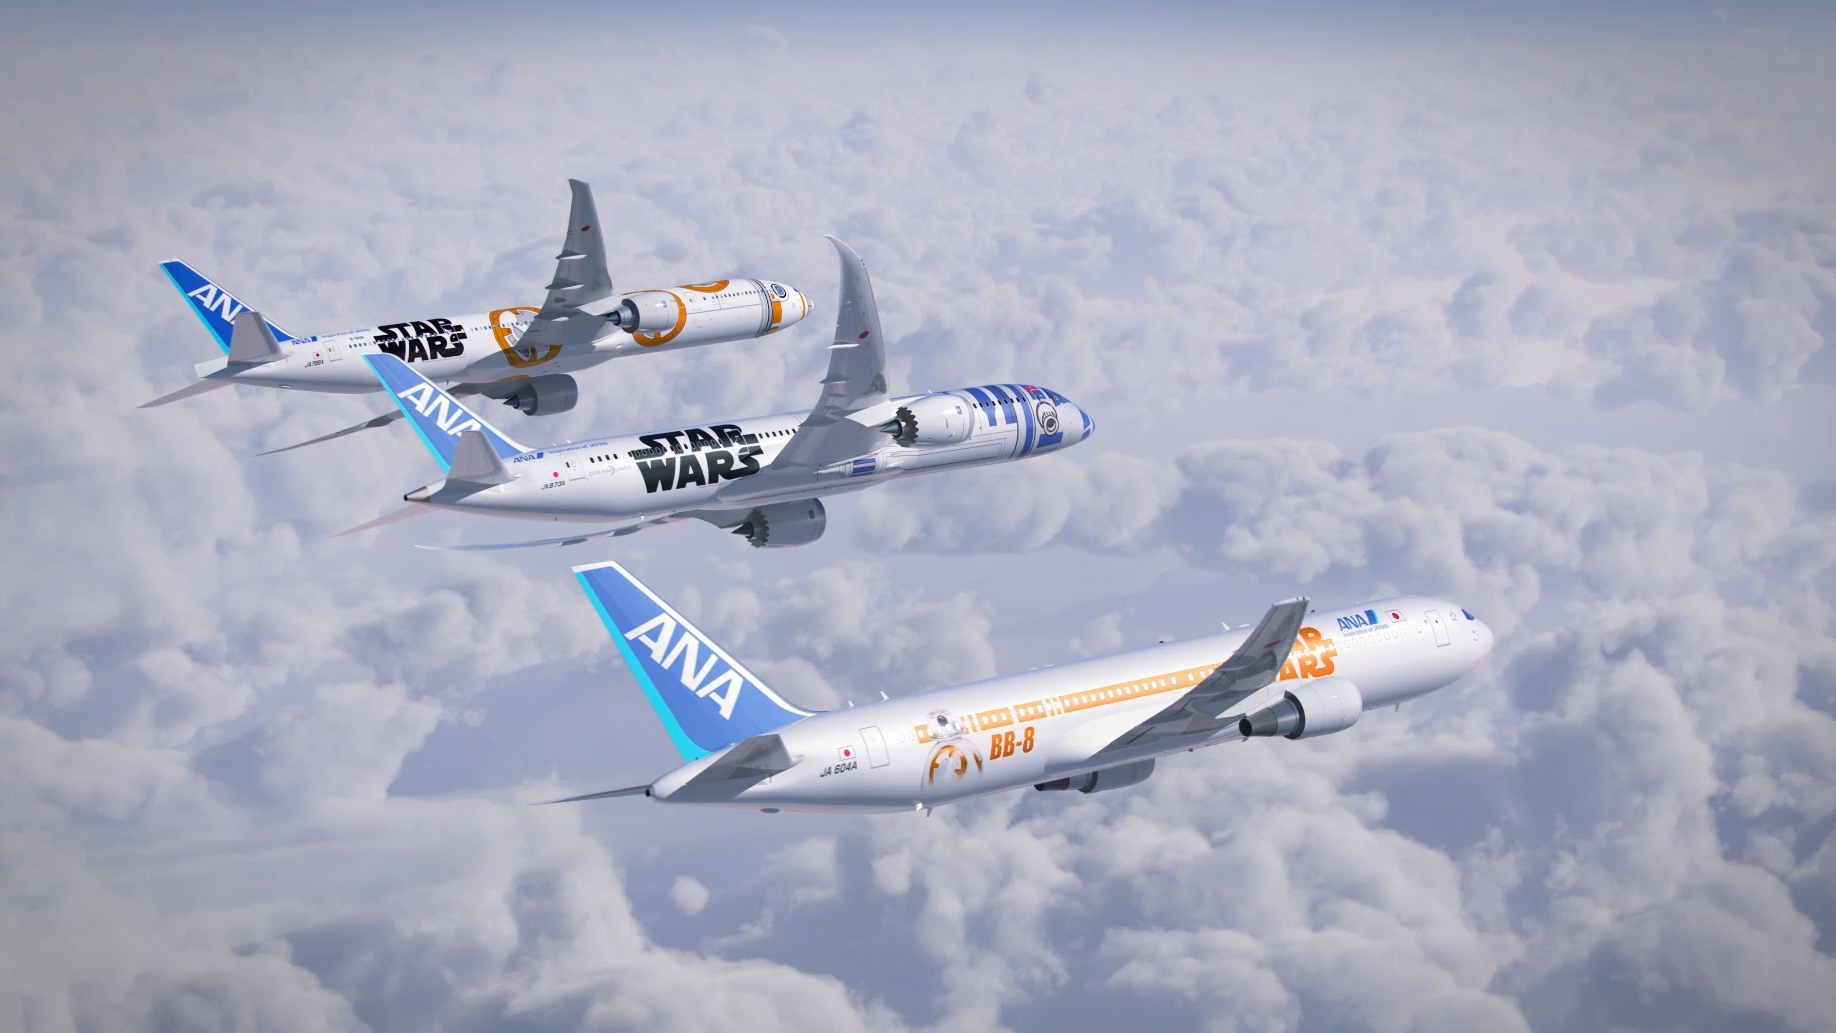 New Ana Star Wars Planes Feature R2 D2 And 8 Cnn Travel